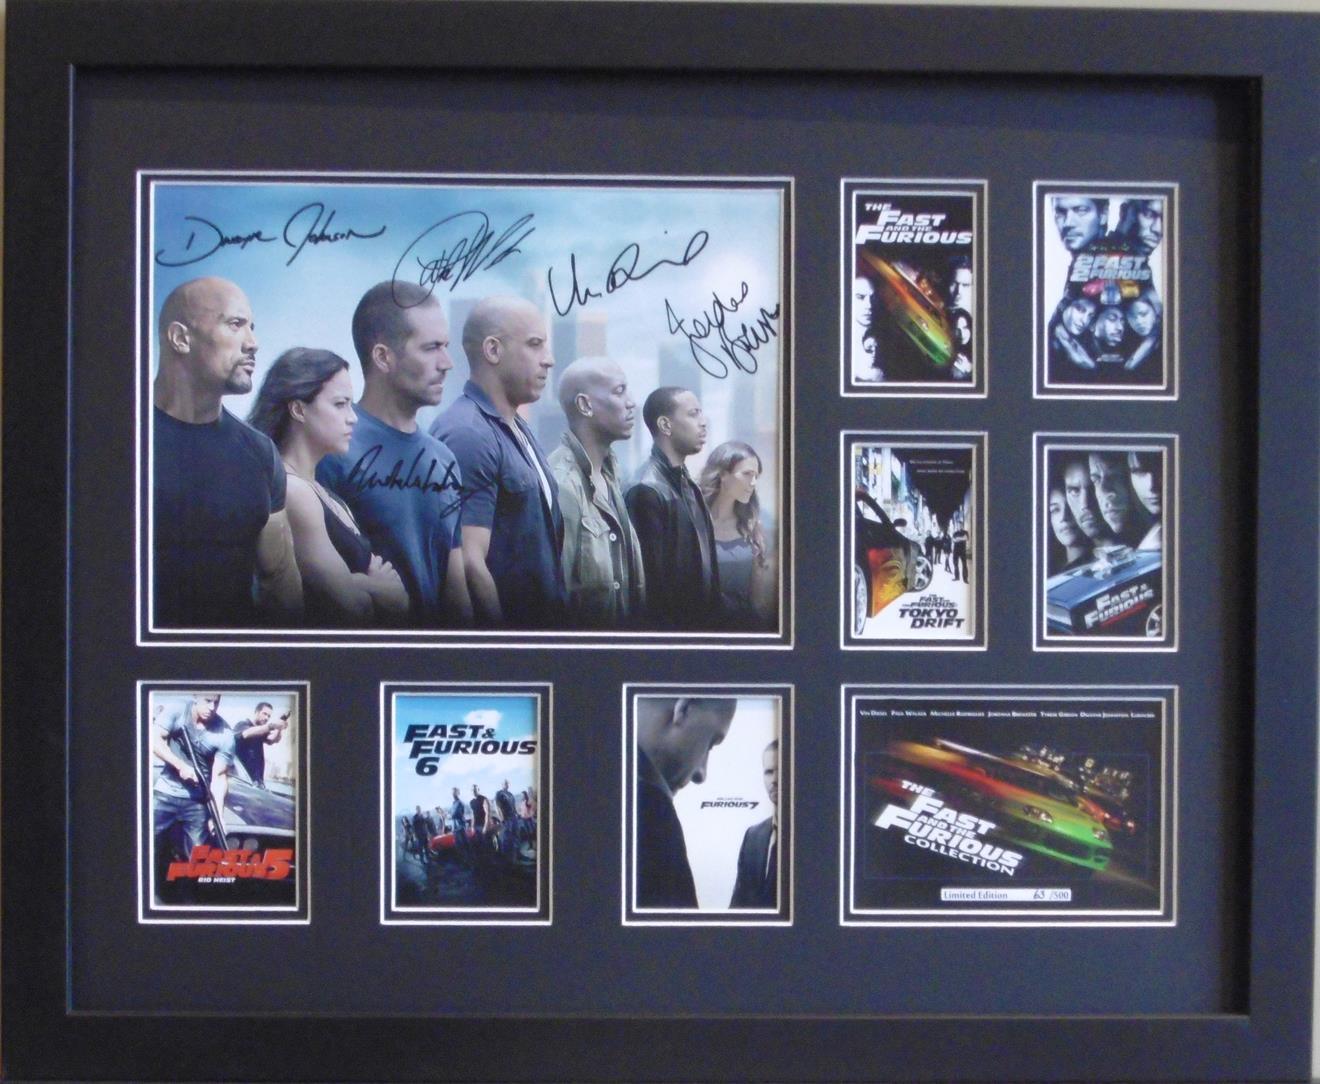 FAST AND FURIOUS 1-7 PAUL WALKER SIGNED LIMITED EDITION FRAMED MEMORABILIA